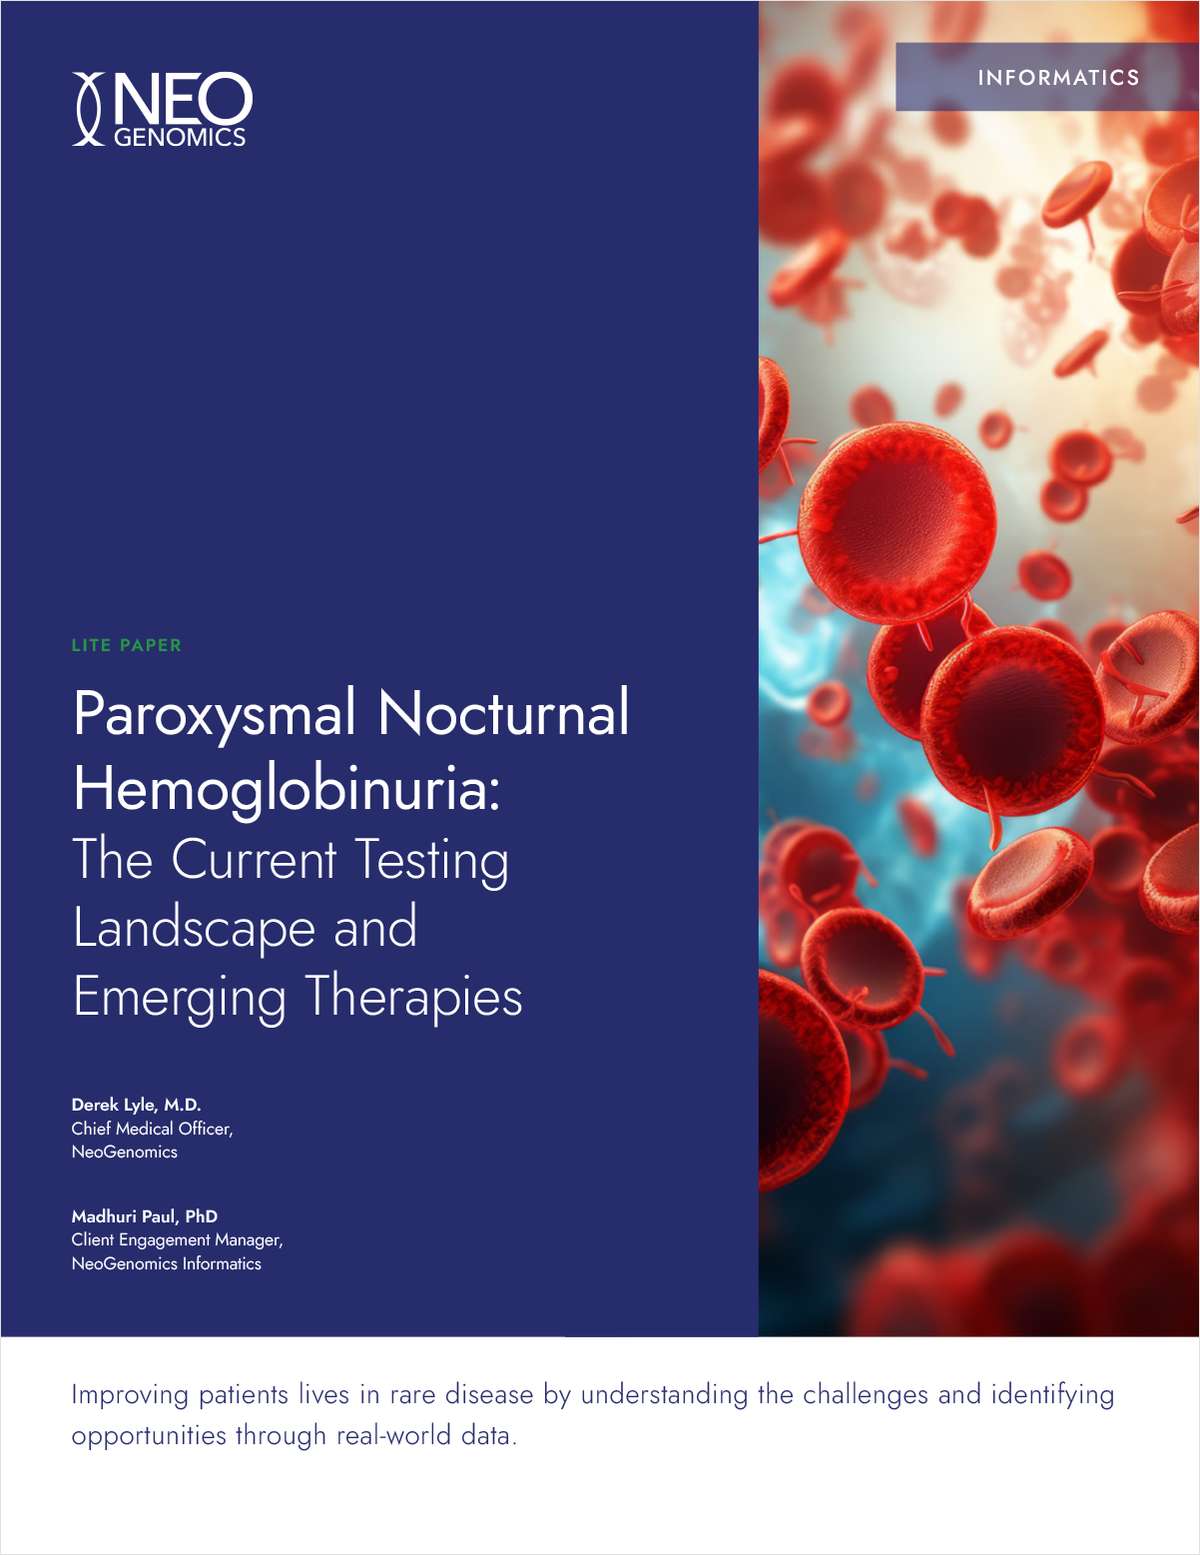 Paroxysmal Nocturnal Hemoglobinuria: The Current Testing Landscape and Emerging Therapies